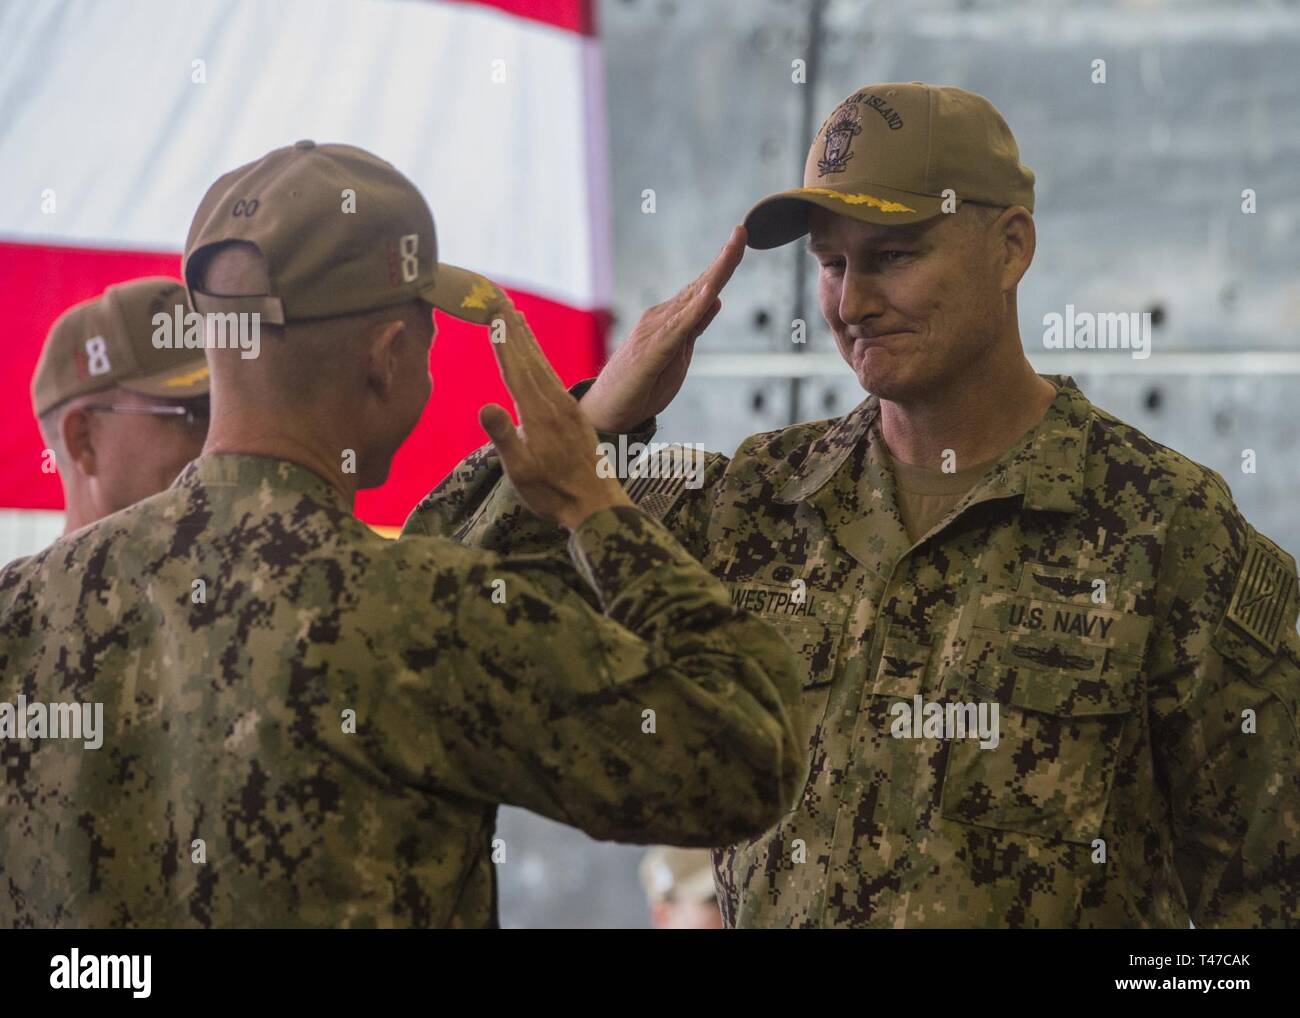 DIEGO (March 15, 2019) — Capt. David Oden, the outgoing commanding officer of the amphibious assault ship USS Makin Island (LHD 8), turns over command to Capt. Christopher Westphal during a change of command ceremony held in the ship’s well deck. Makin Island, homeported in San Diego, is conducting a depot-level maintenance availability. Stock Photo